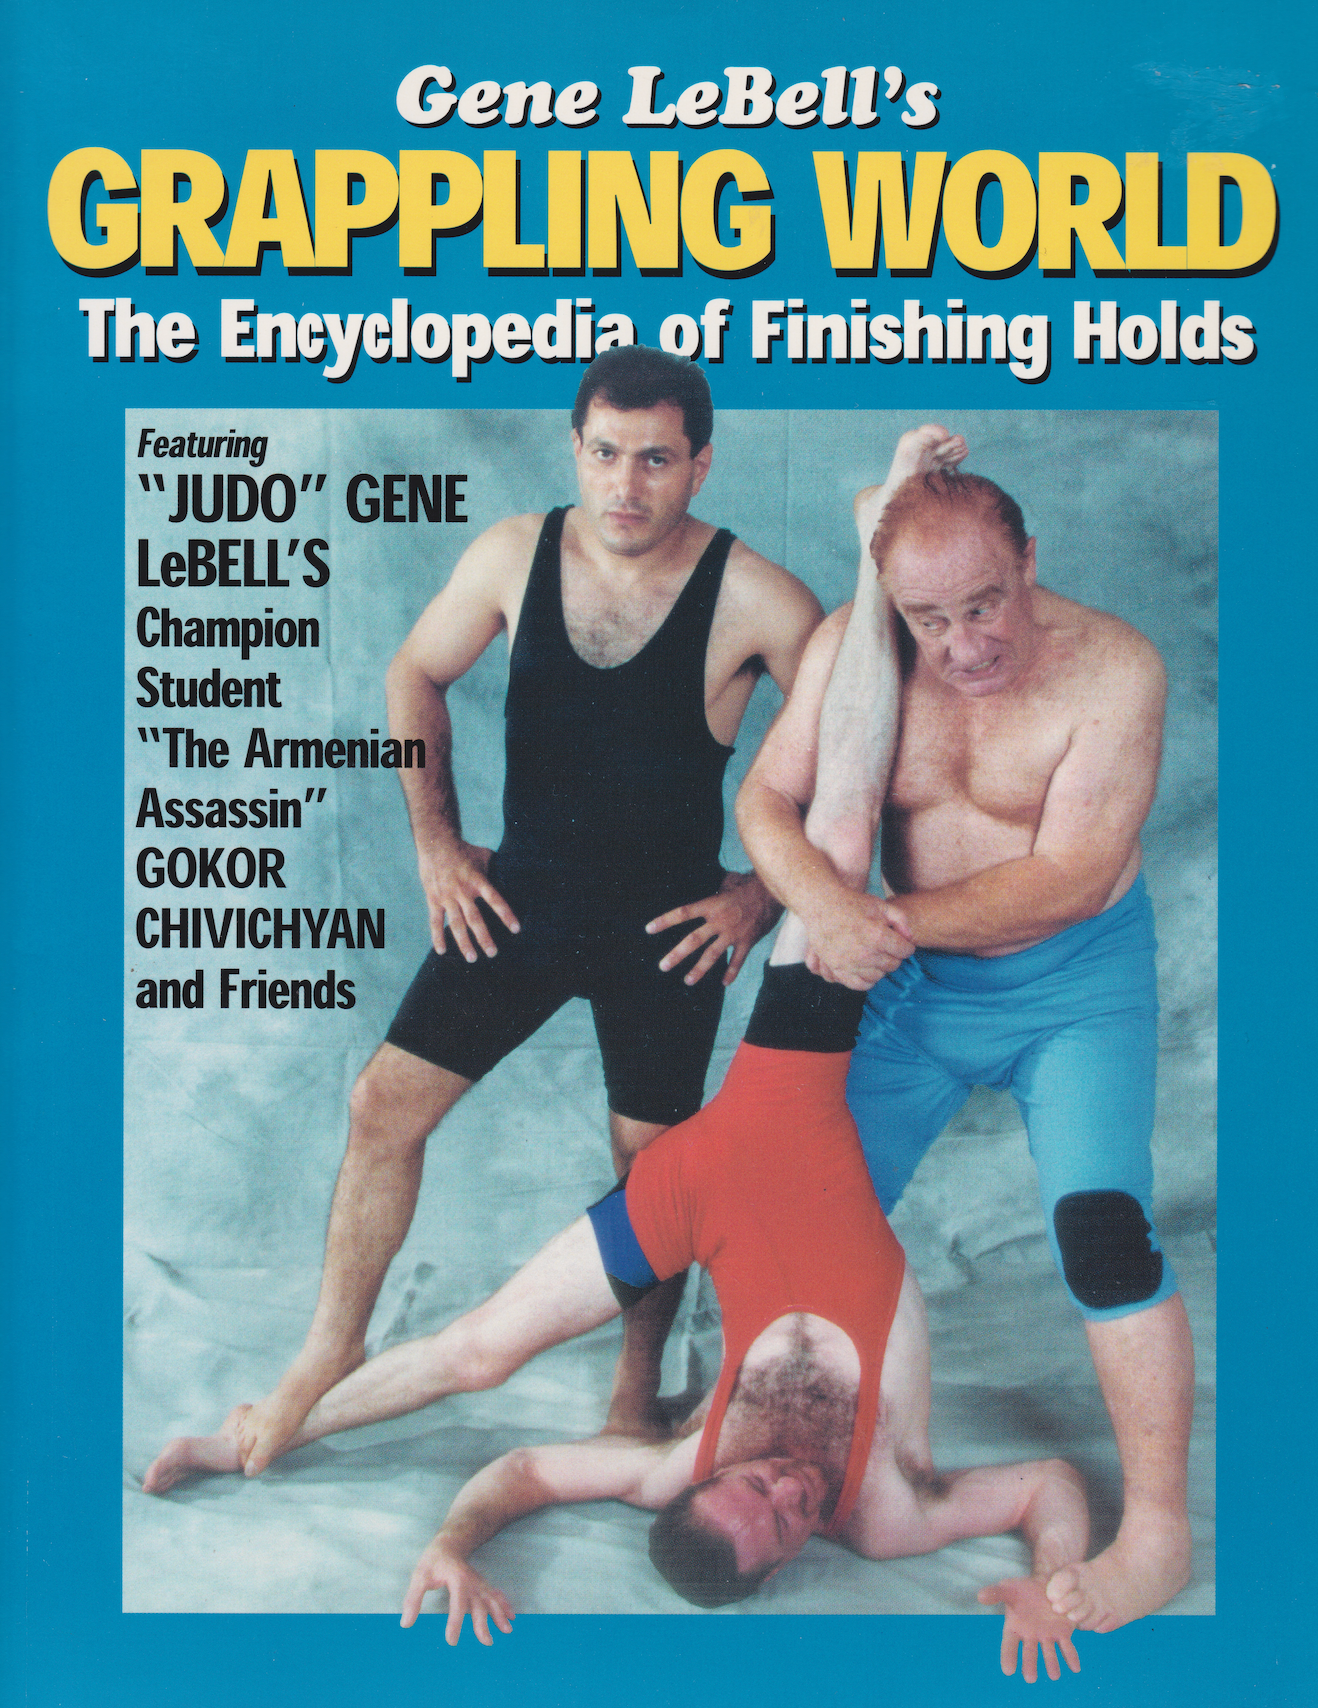 Gene LeBell's Grappling World - The Encyclopedia of Finishing Holds Book (1st Edition) (Preowned)